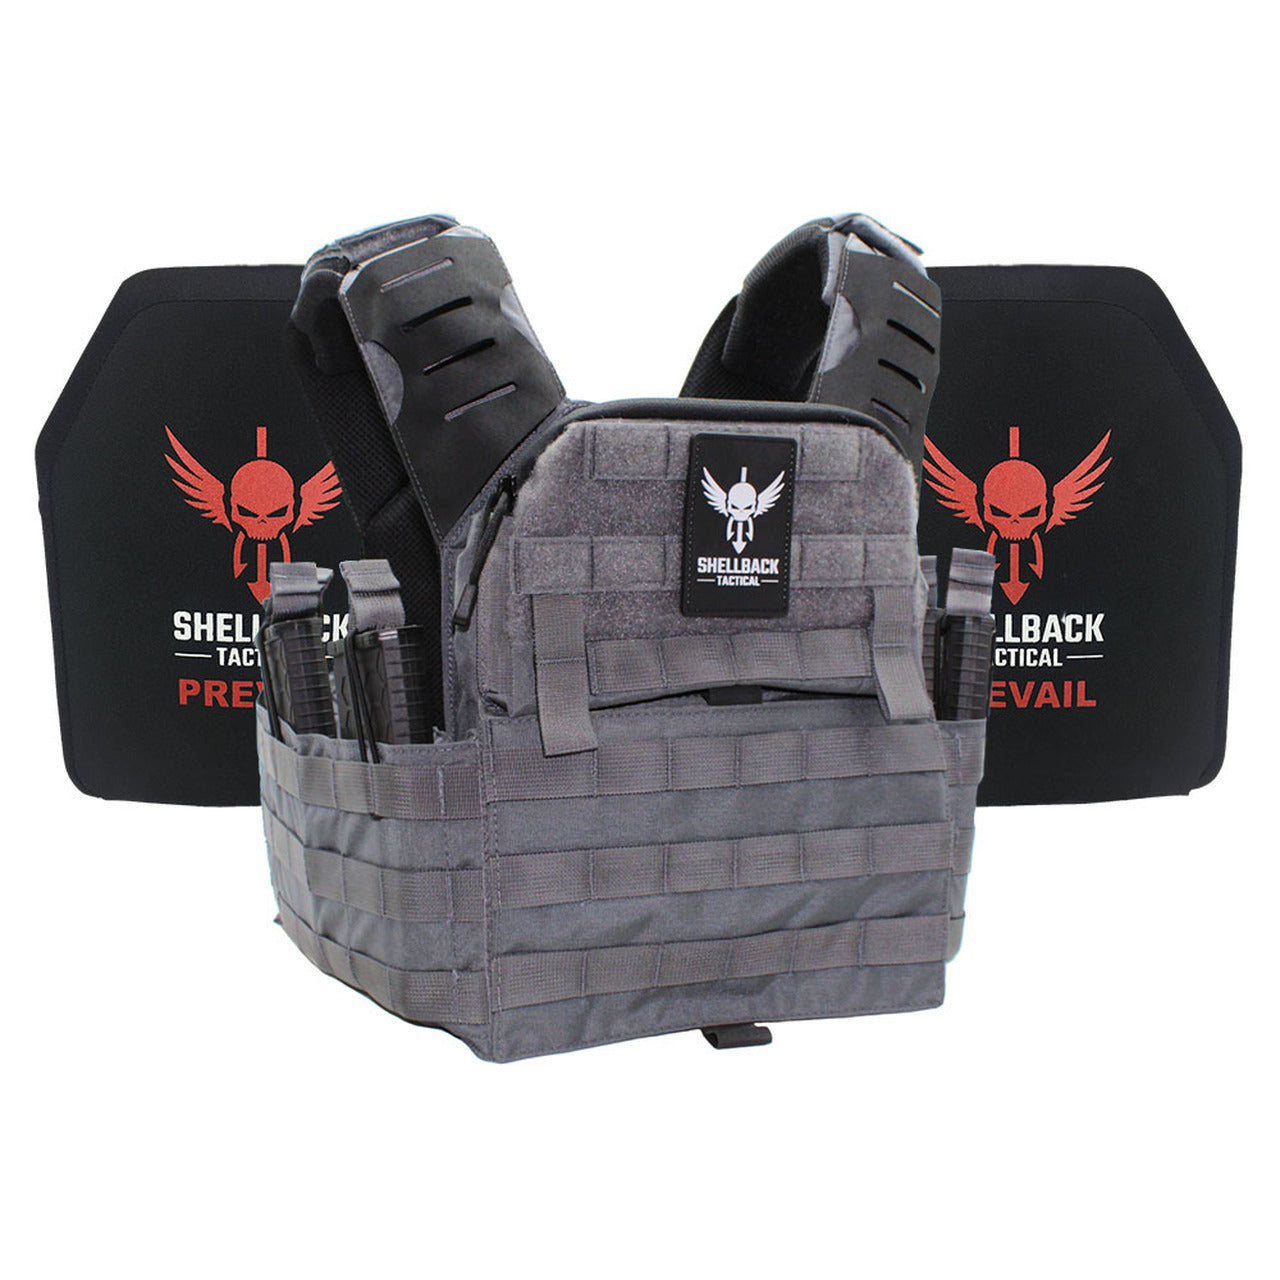 A Shellback Tactical Banshee Elite 2.0 Active Shooter Kit with Level III Single Curve 10 x 12 Hard Armor plate carrier with a red and black logo on it.